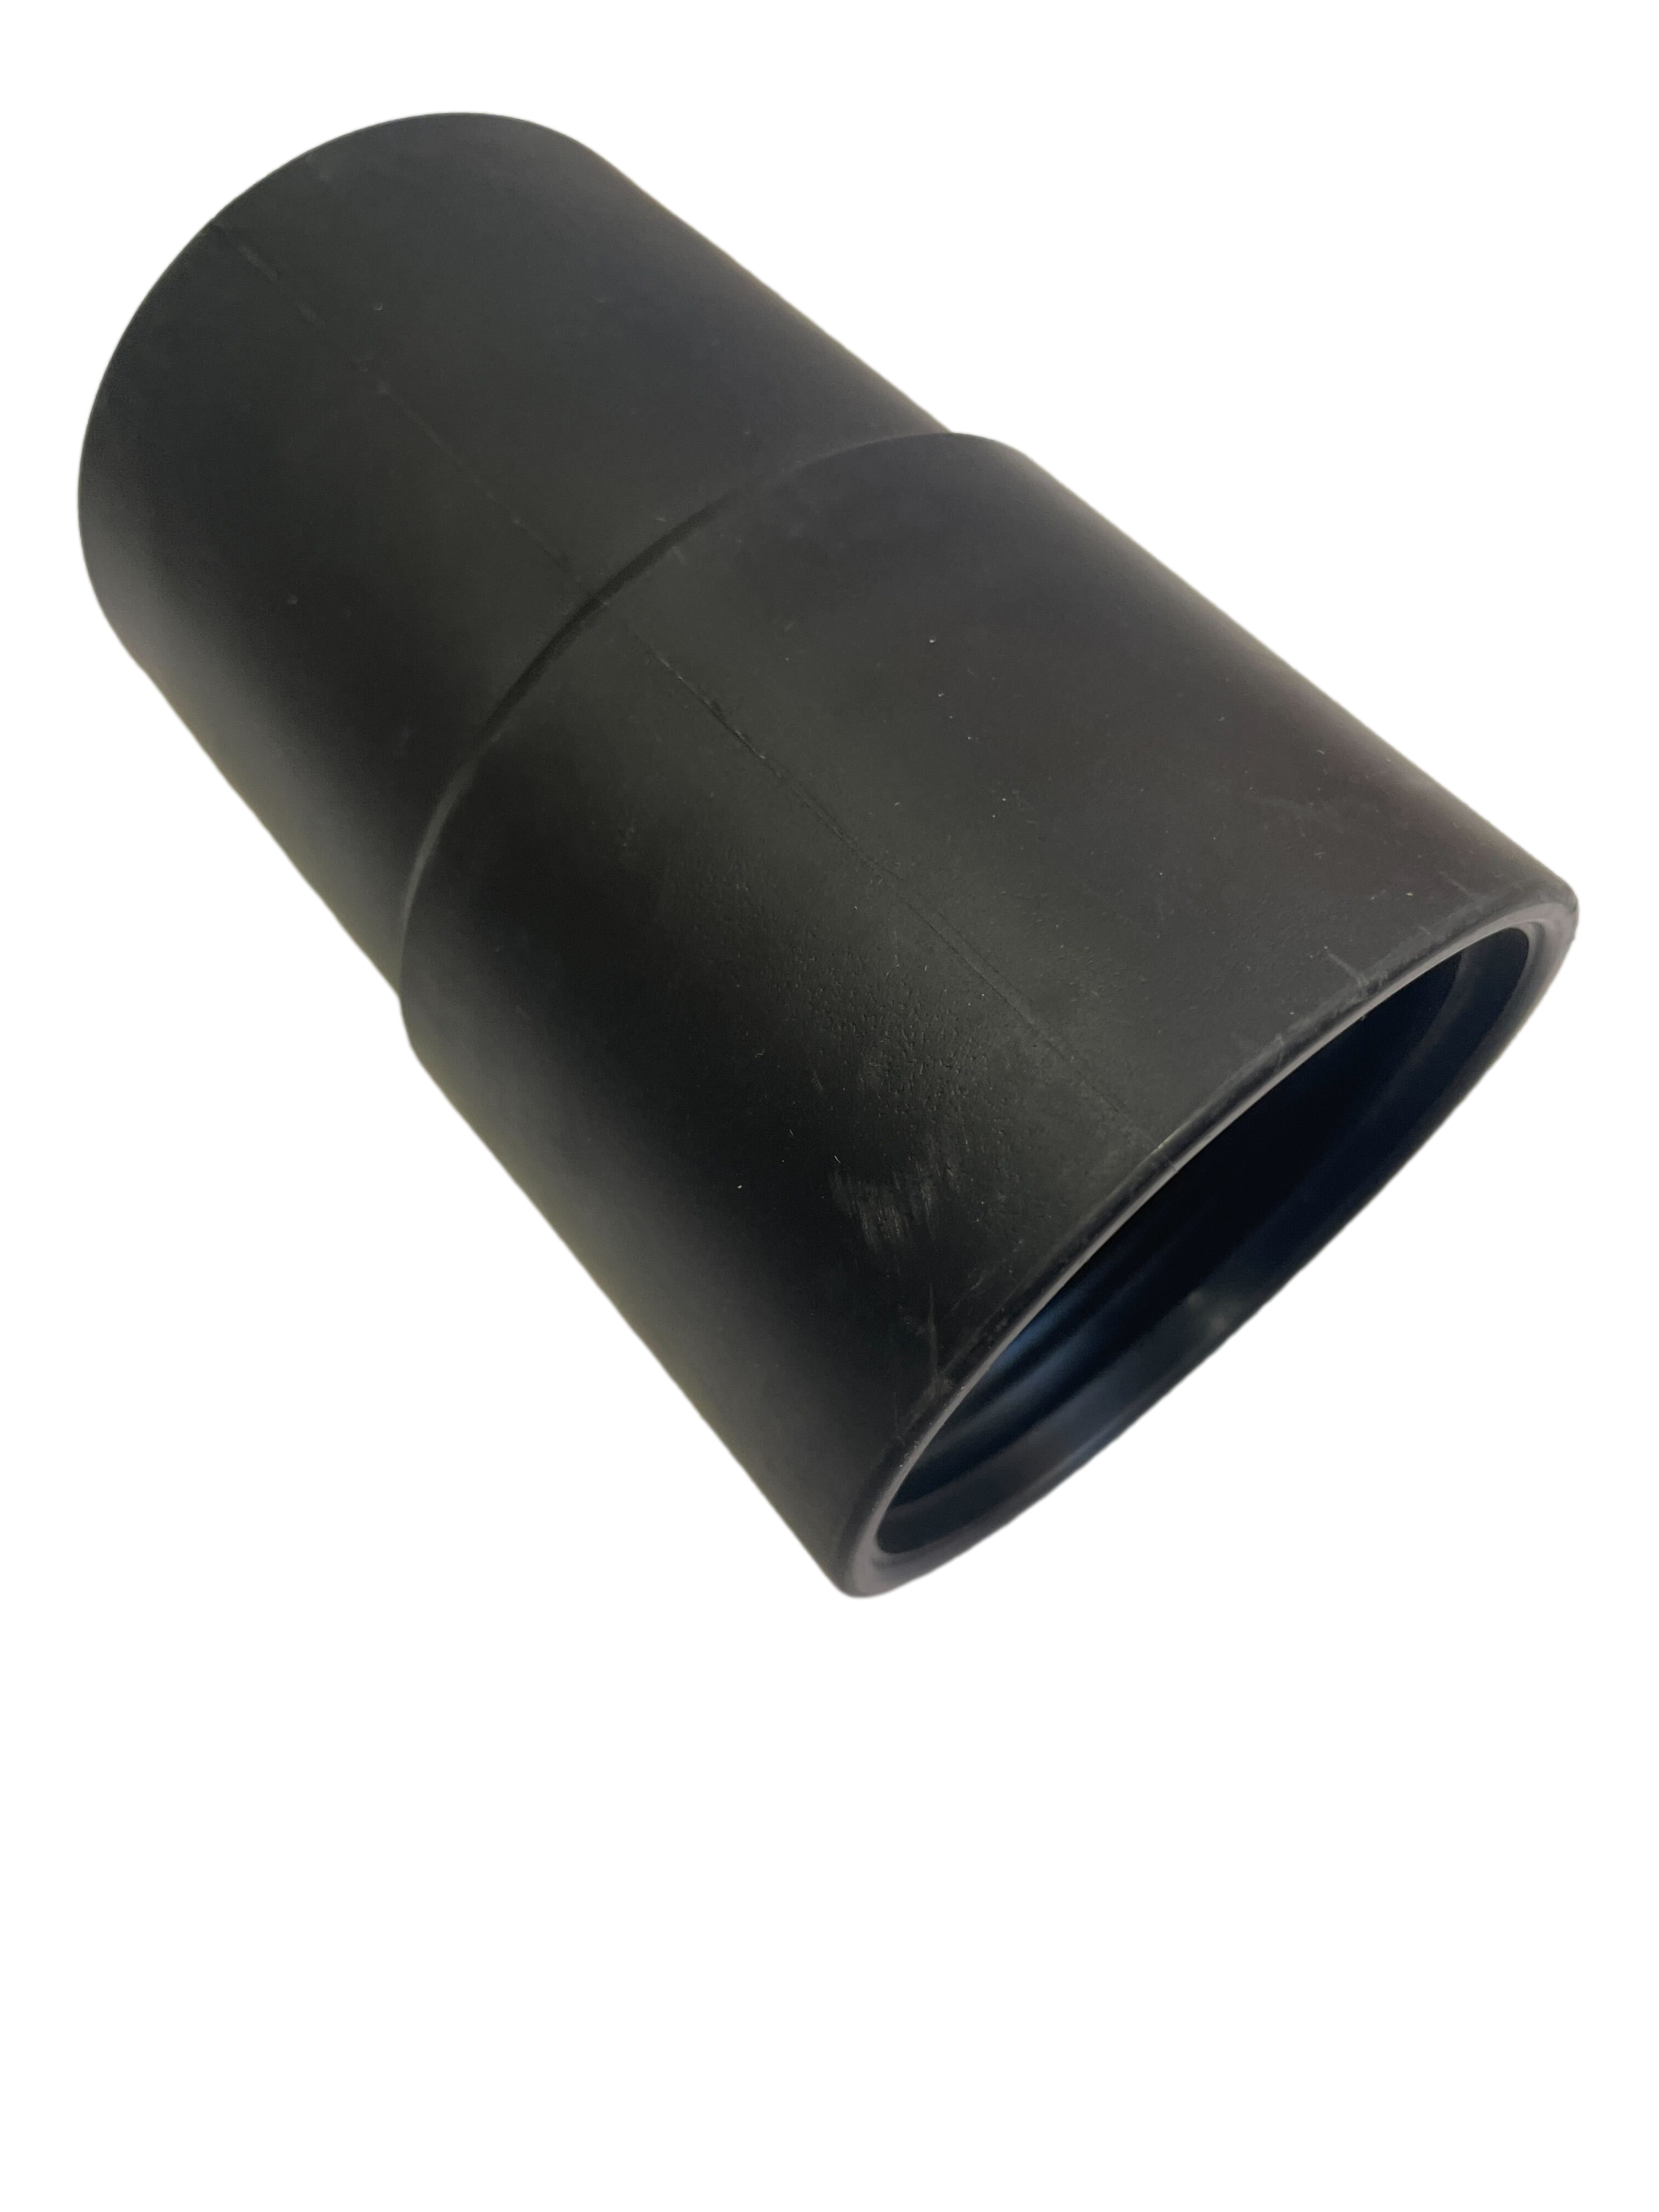 2" Wide, 50ft Wire Reinforced Hose - Compatible with 16 & 20 Gallon Classic Cyclone